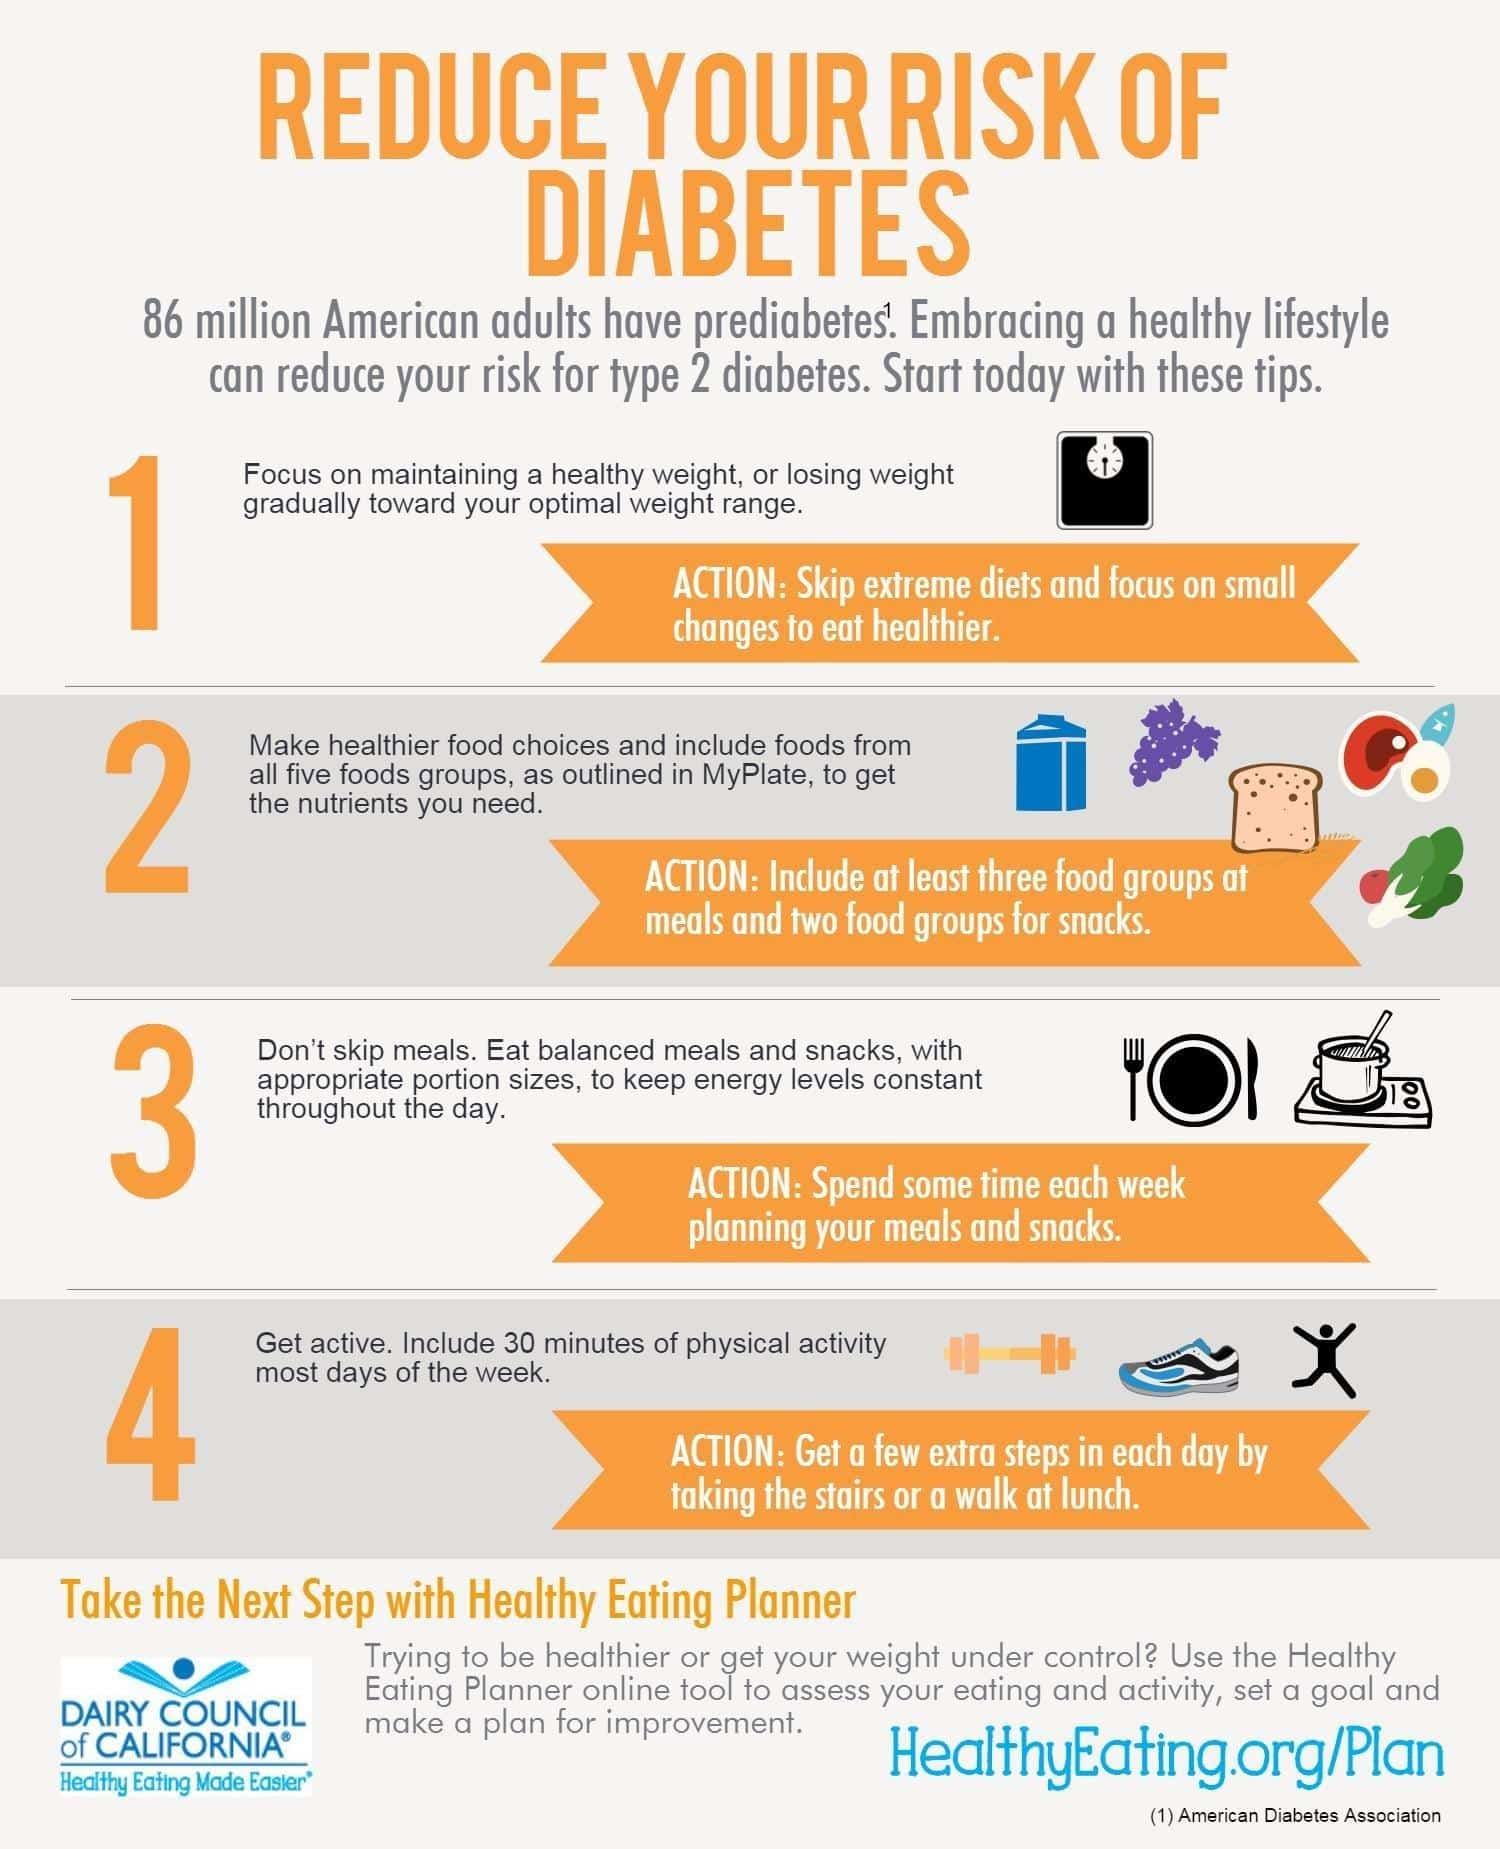 What Percentage Of Type 2 Diabetes Is Preventable?